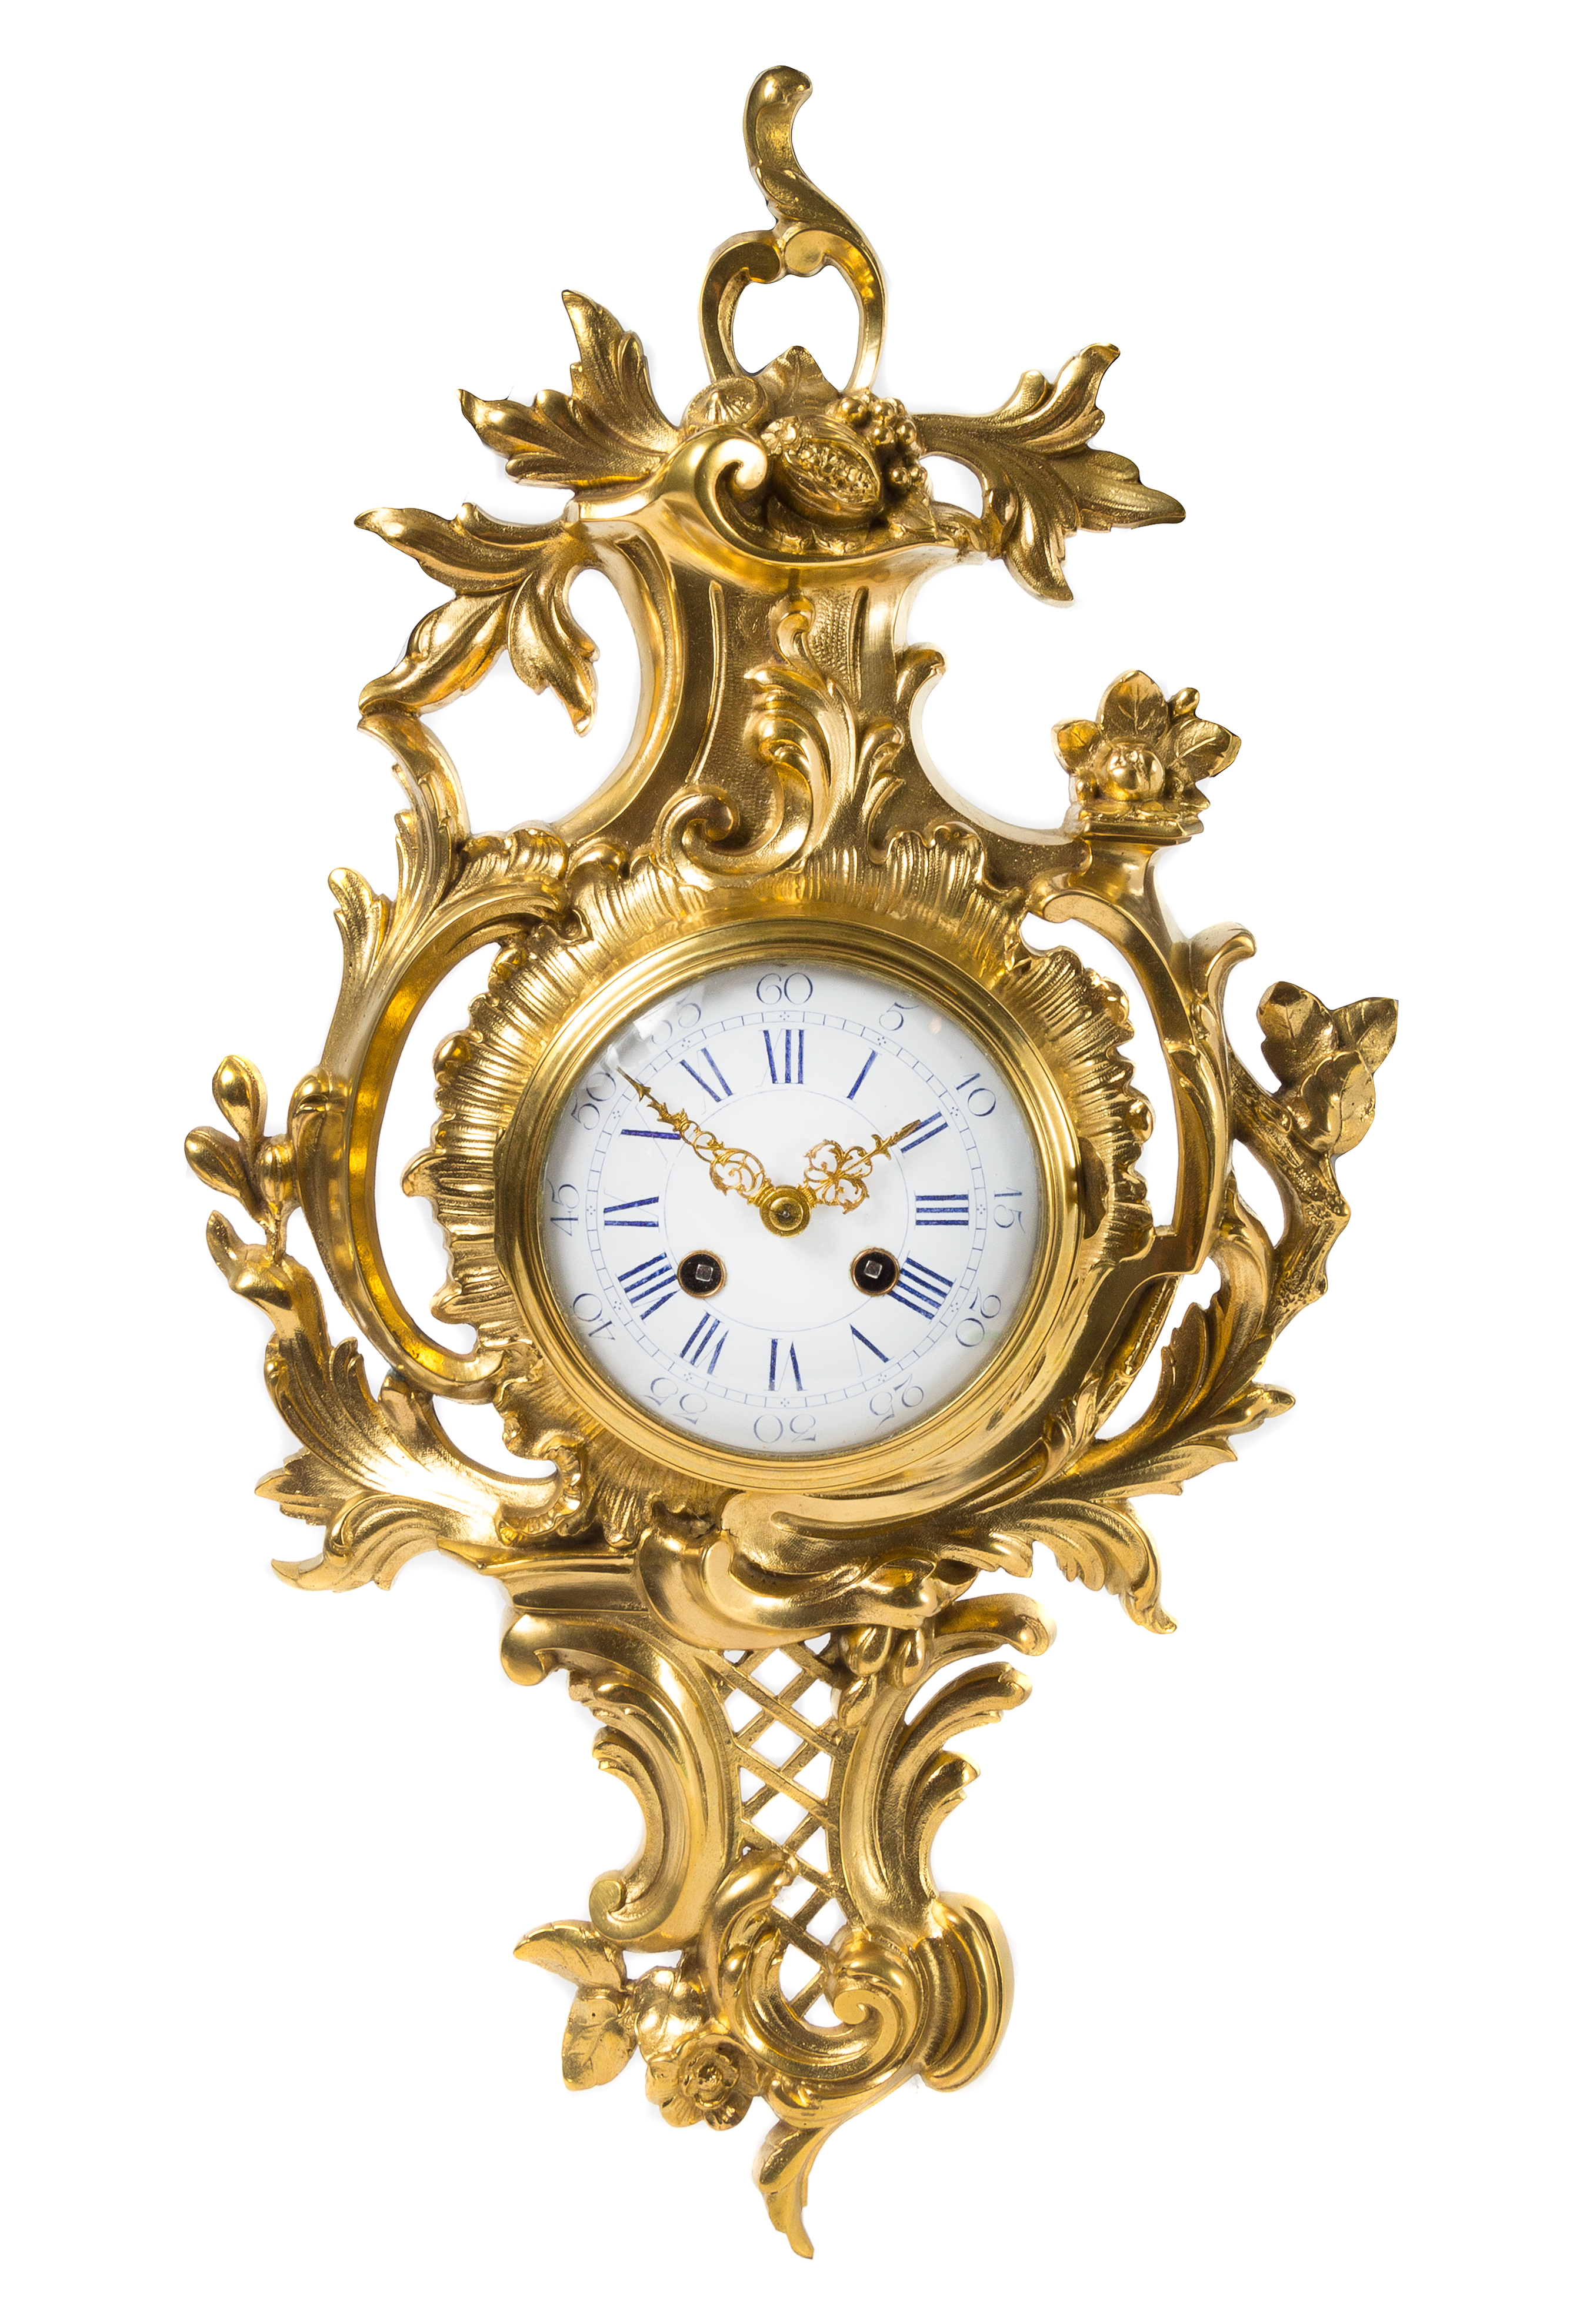 A Rococo Style Gilt Bronze Cartel Clock Height 21 inches.